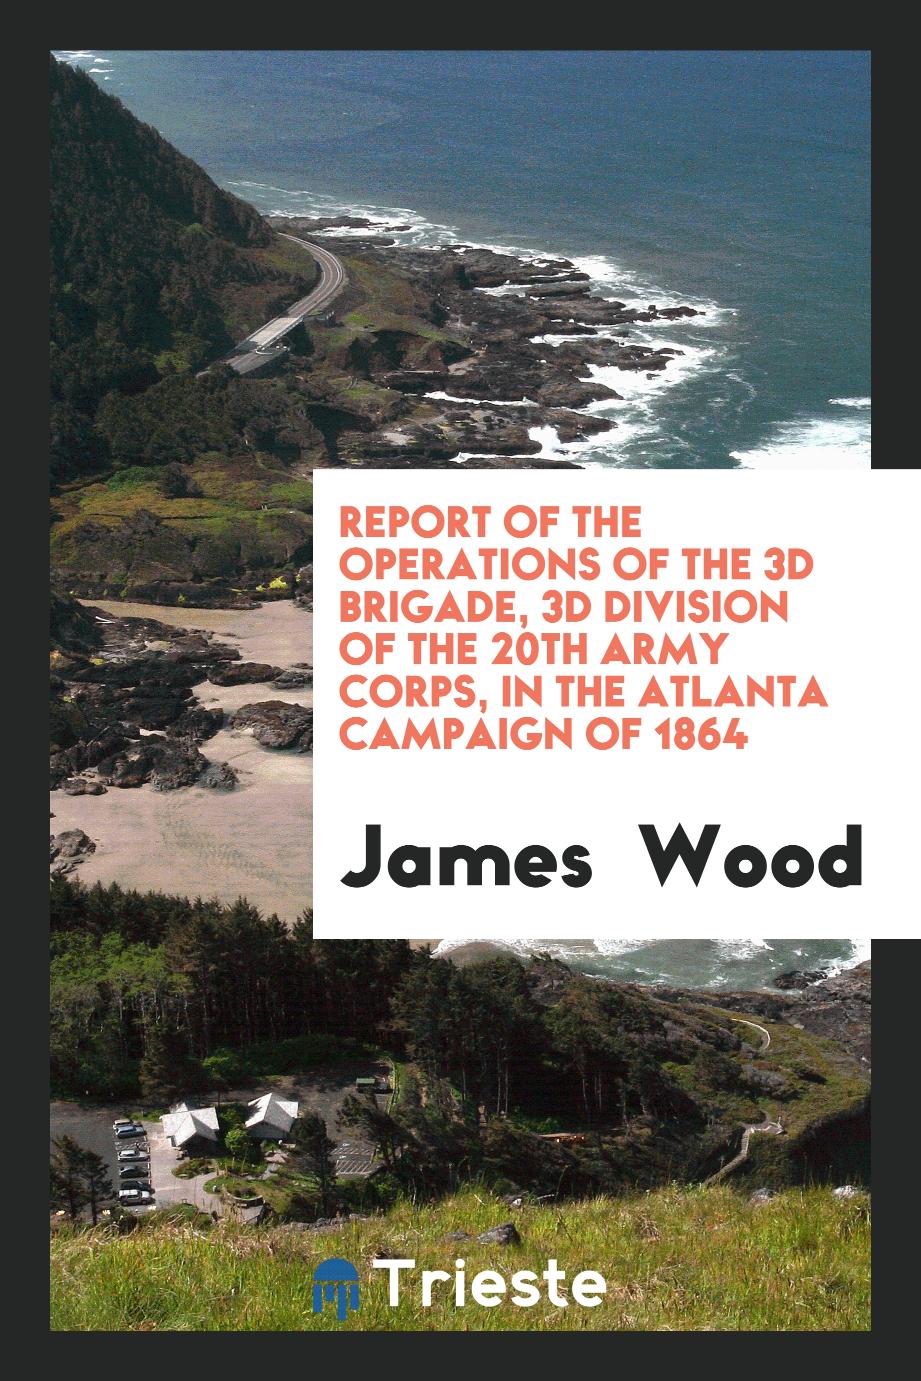 Report of the Operations of the 3d Brigade, 3d Division of the 20th Army Corps, in the Atlanta Campaign of 1864